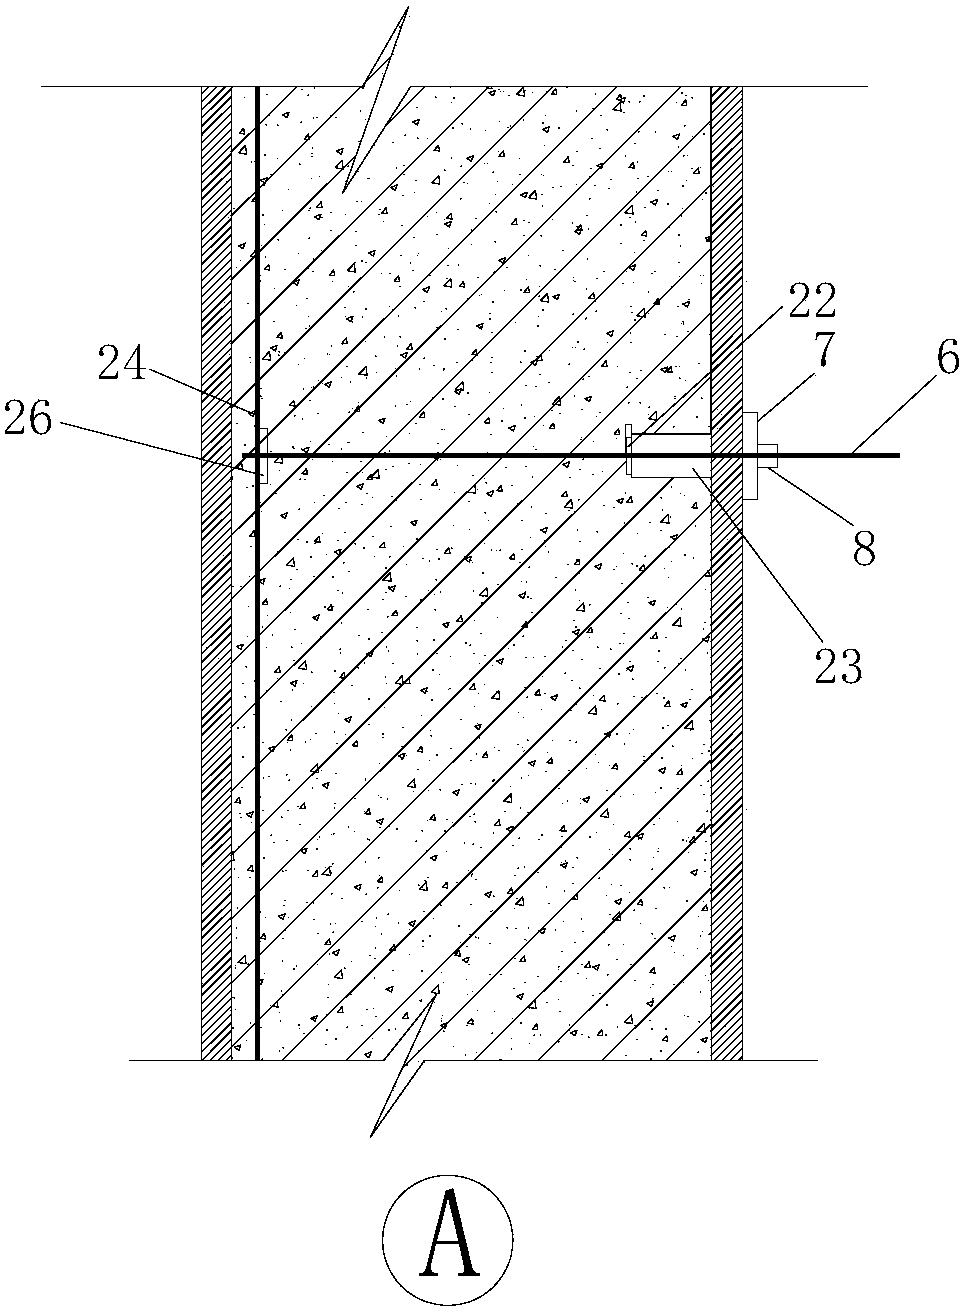 Construction Method of Filling Masonry and Frame Shear Wall to Prevent Interface Cracks